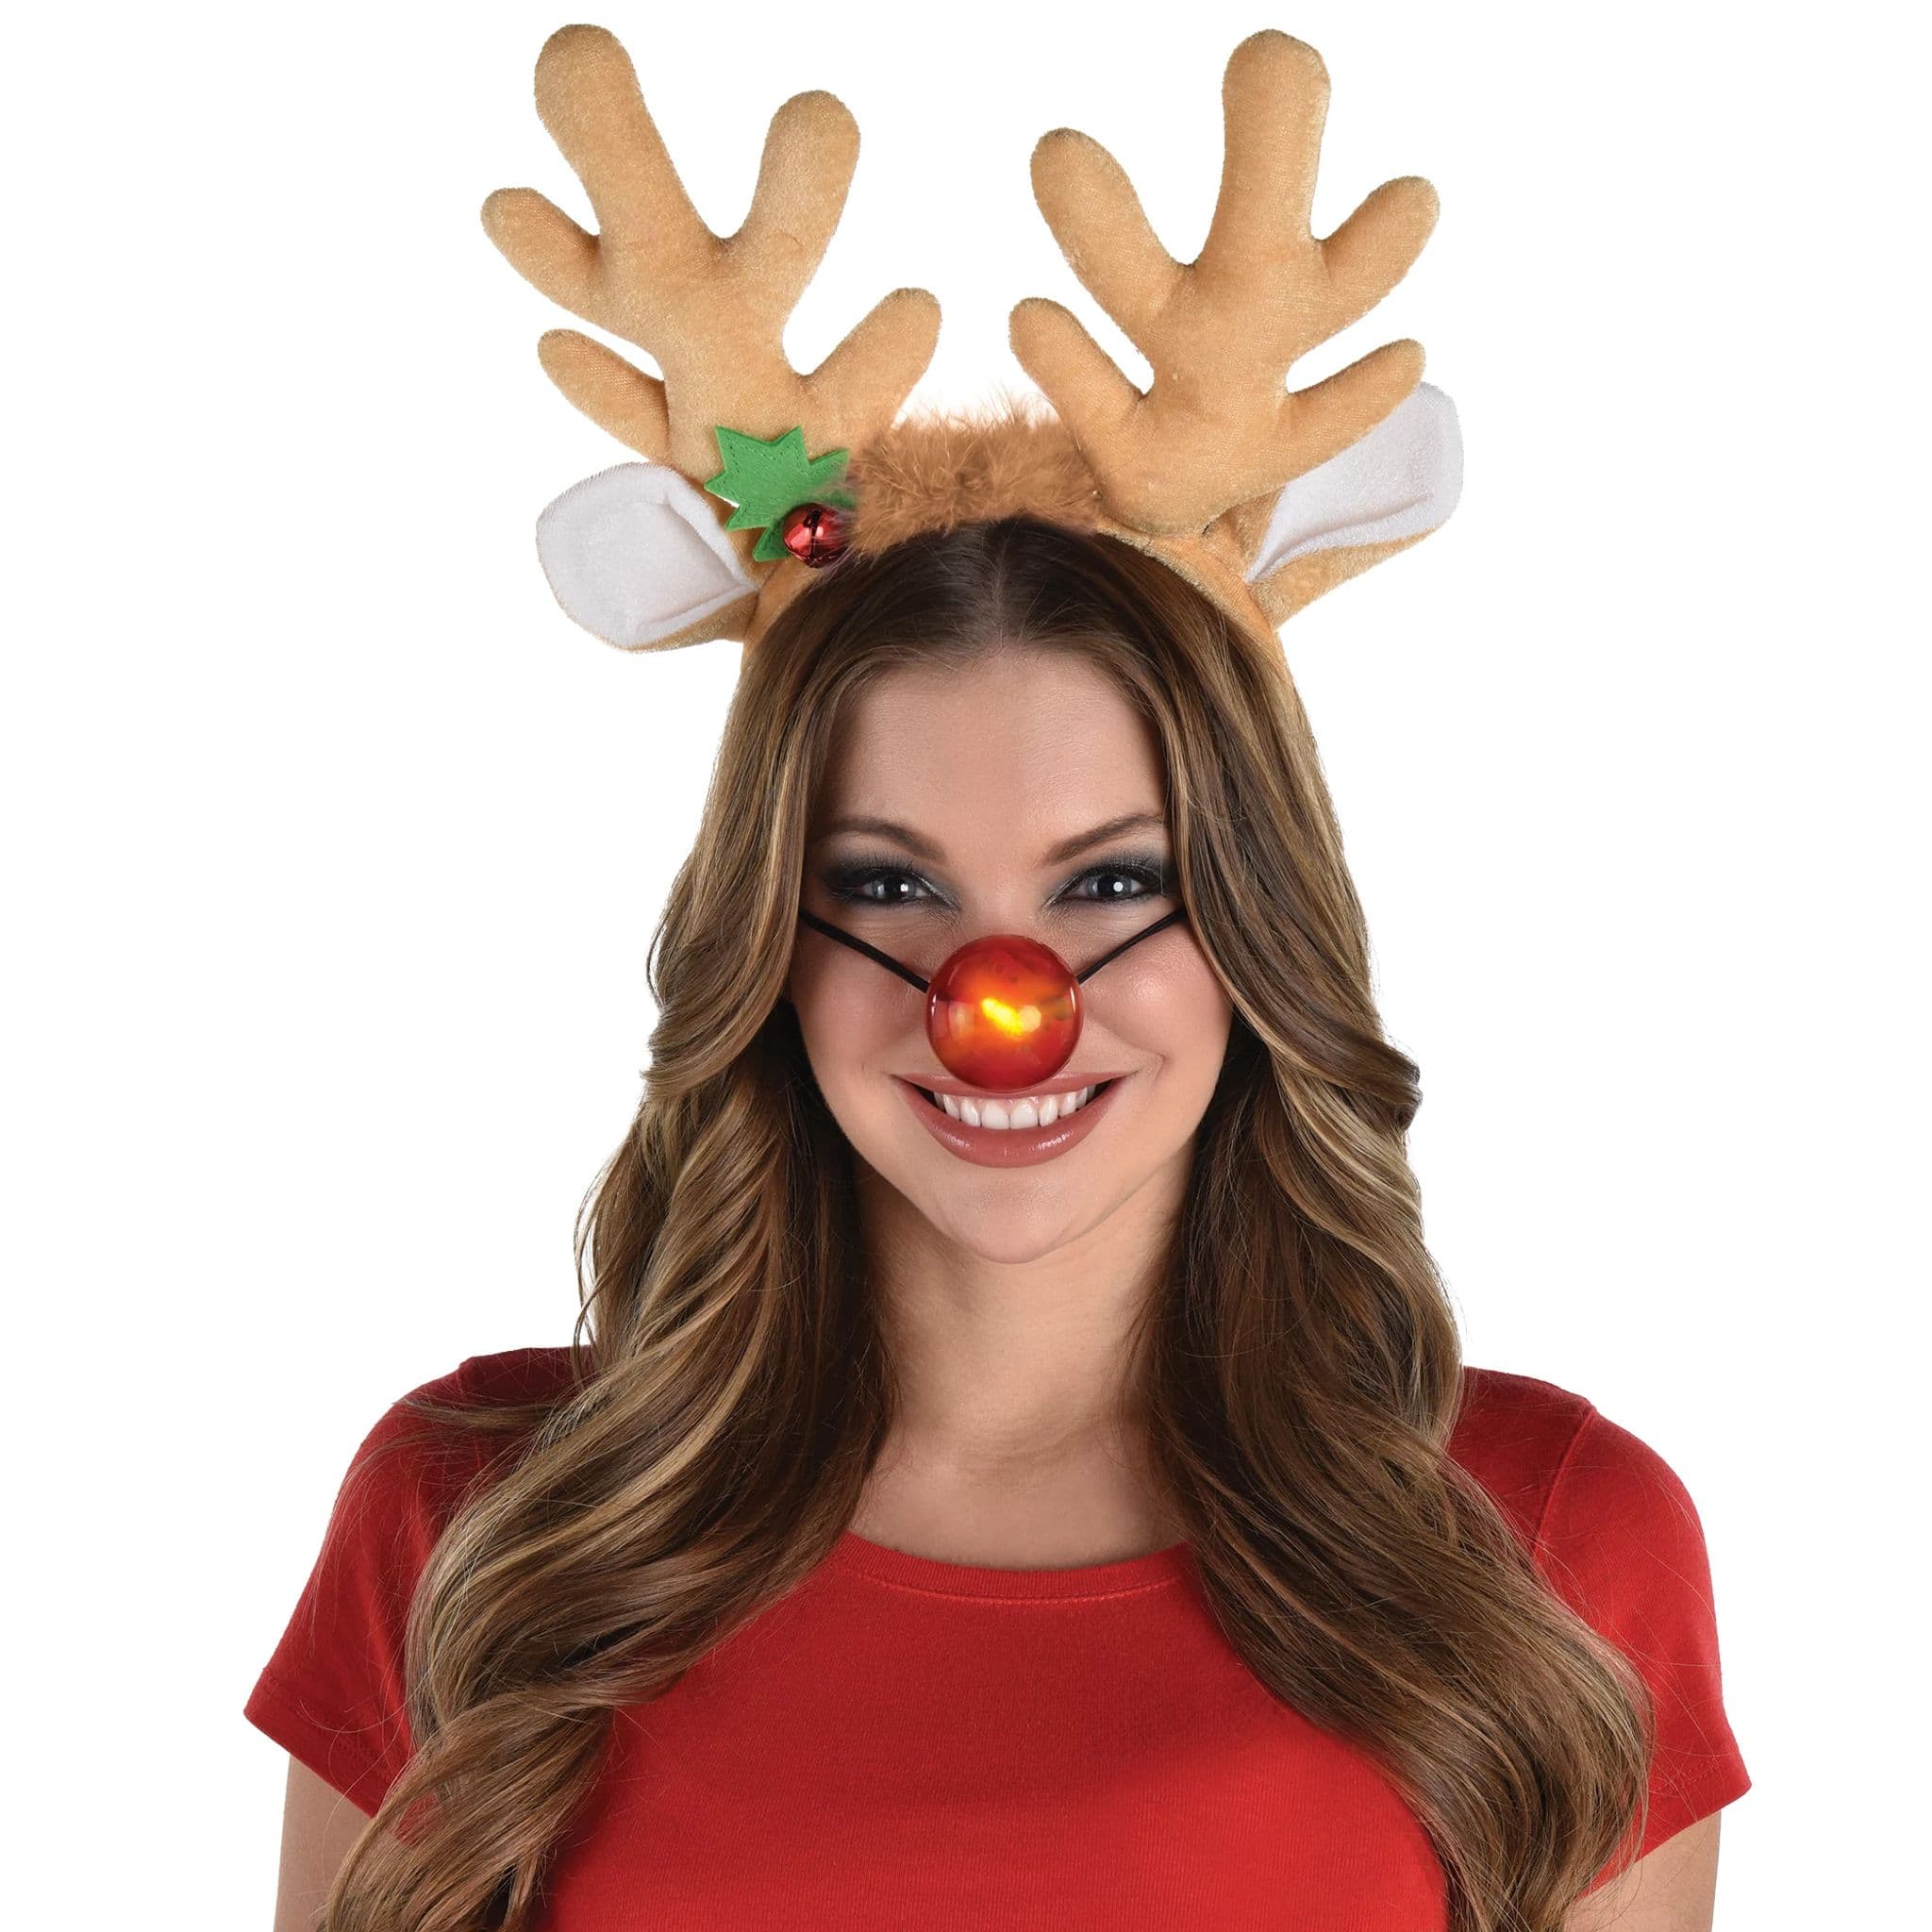 What Does It Mean To Play Reindeer Games